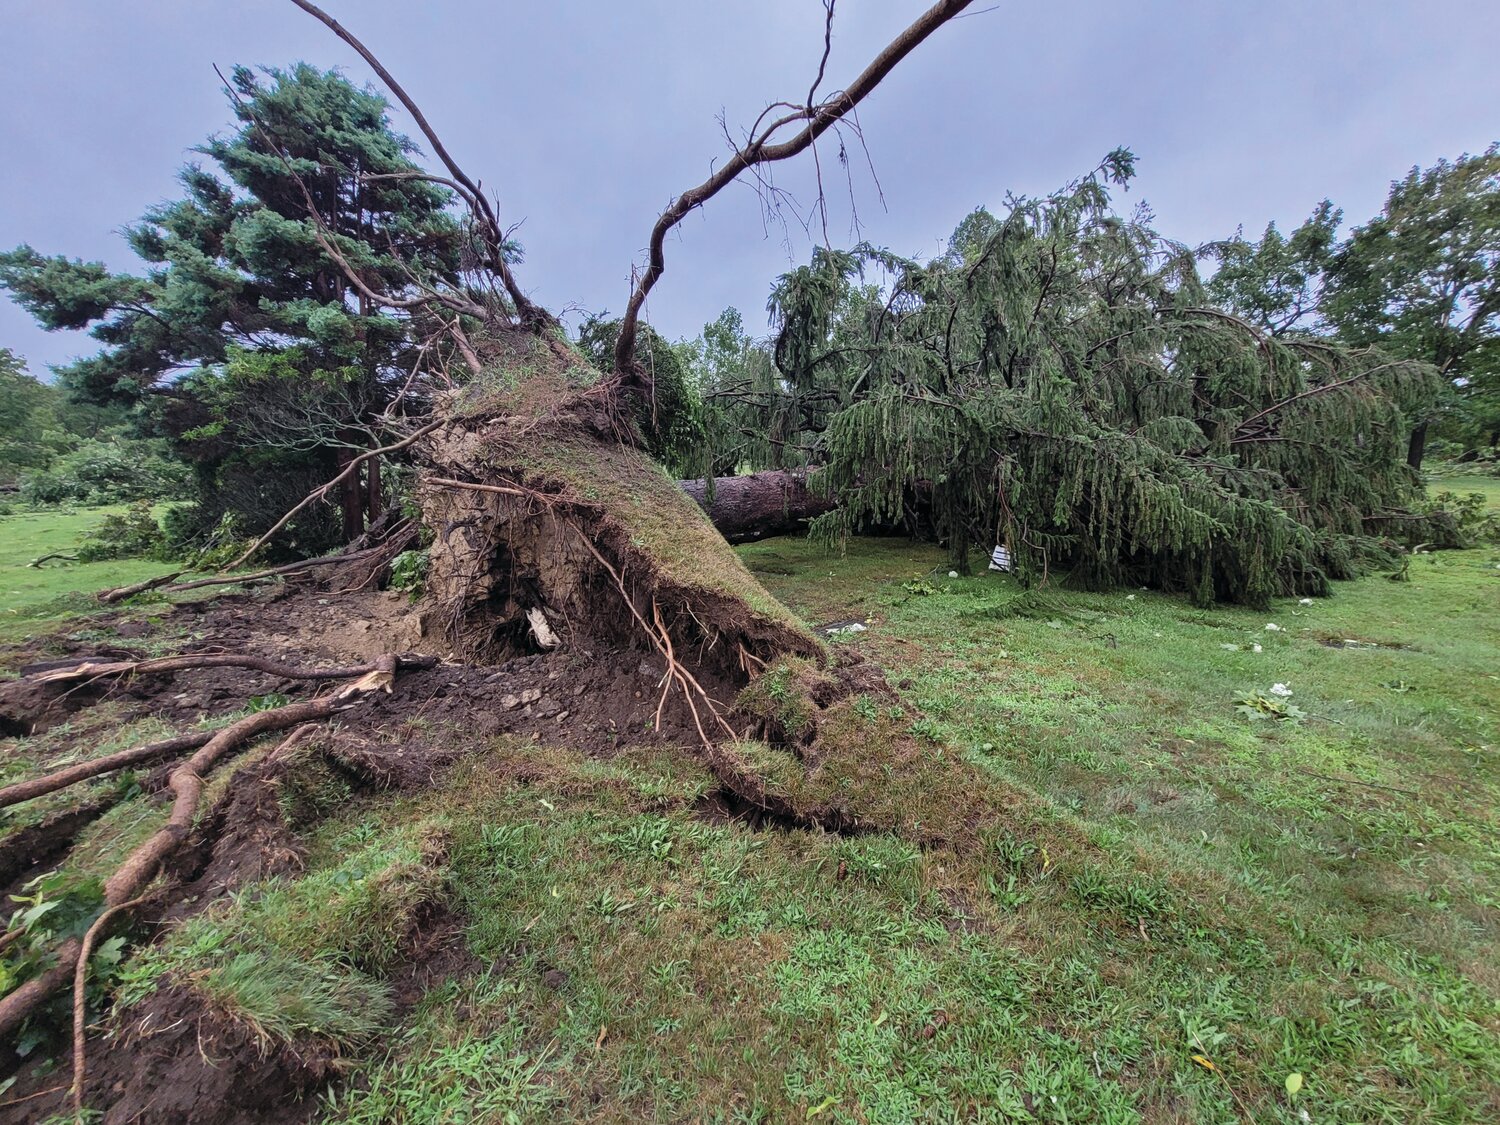 DIRECT HIT: Highland Memorial Park Cemetery in Johnston seems to have taken a direct hit by this morning's tornado. A path of destruction: fallen trees, scattered planters, graves unearthed and huge trees toppled.